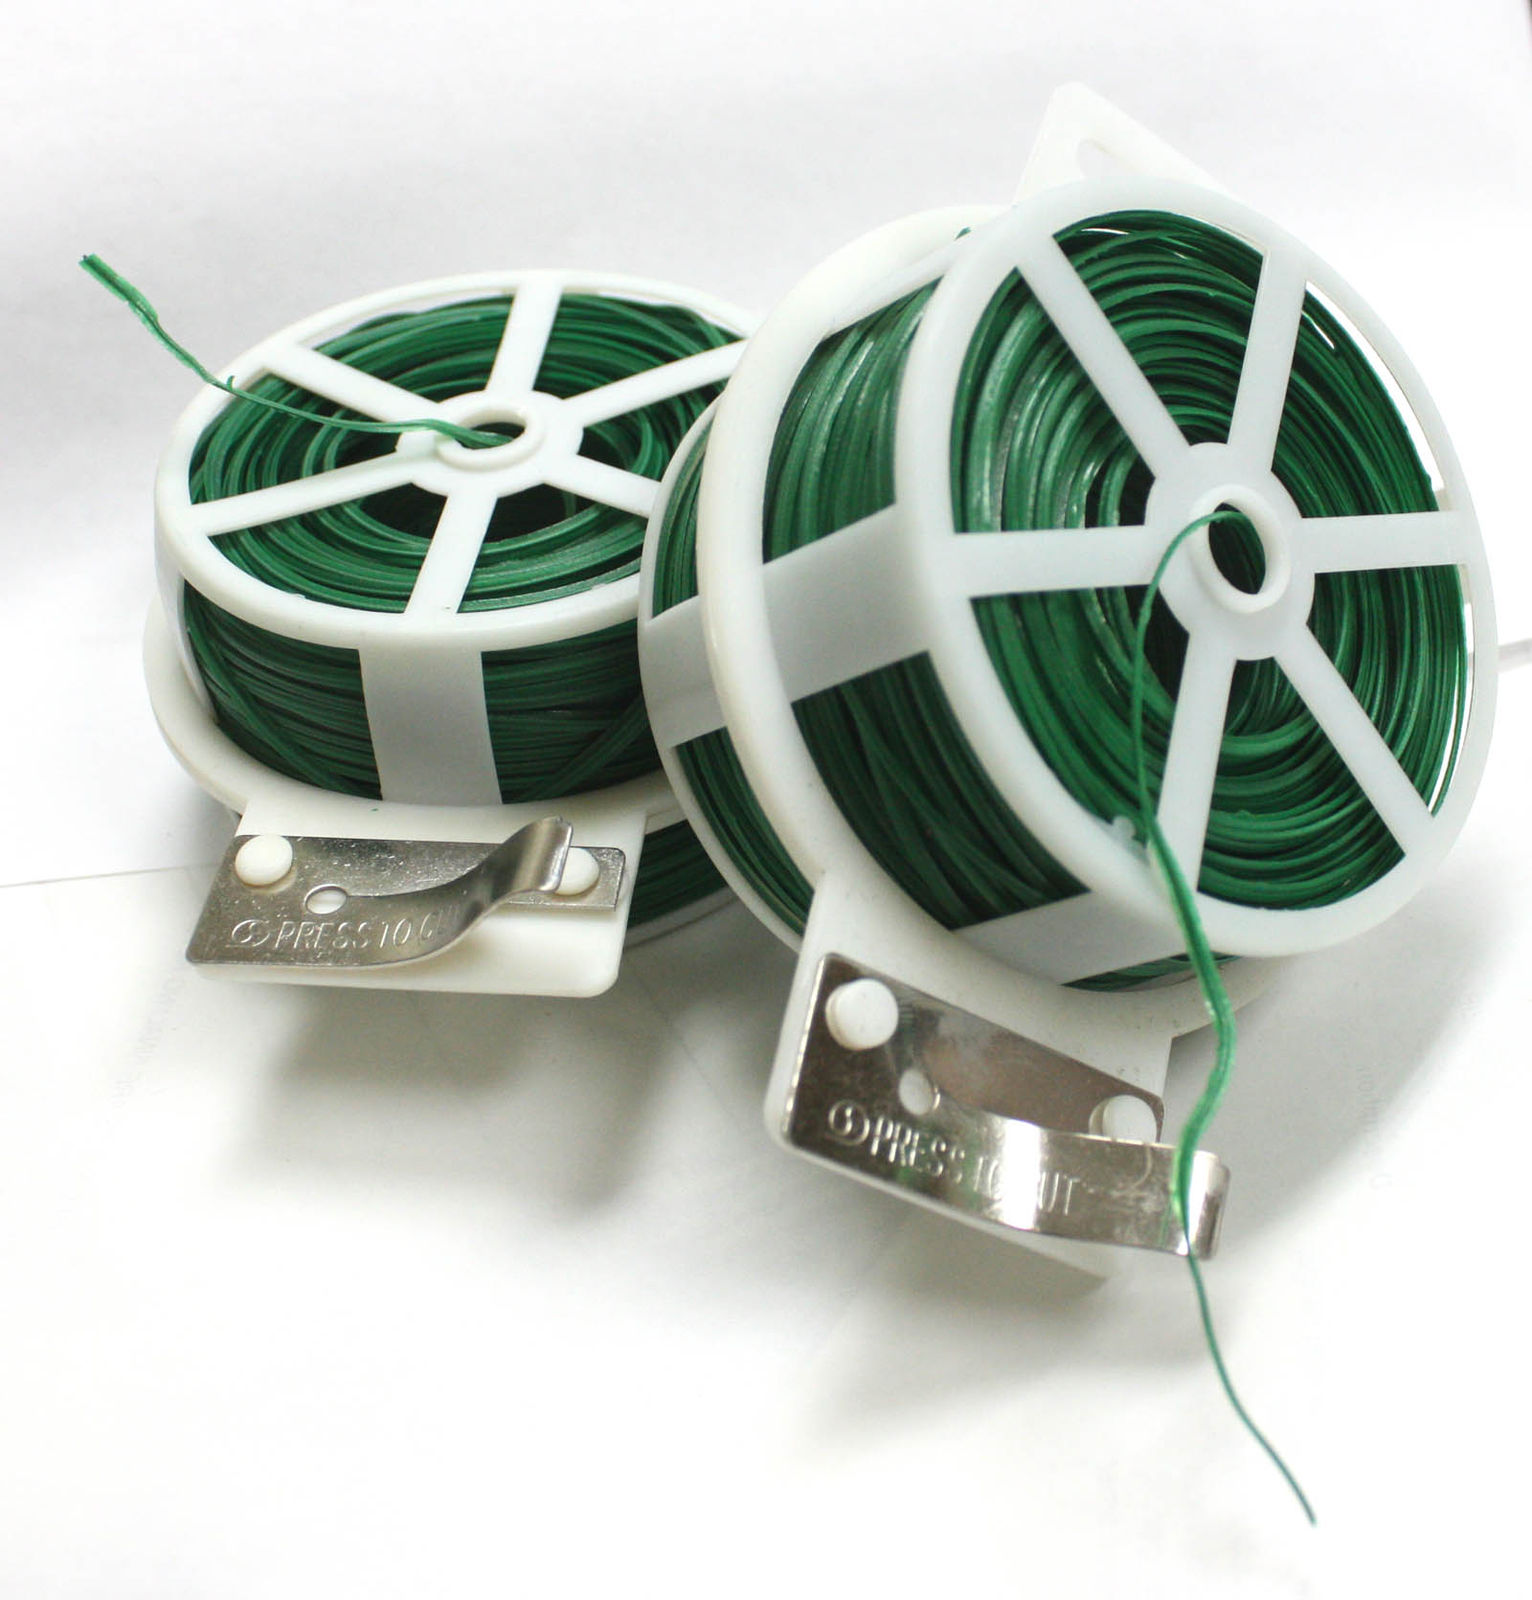 328FT 100M Gardening Plant Support Twist Tie Green Wire Roll and Cutter 